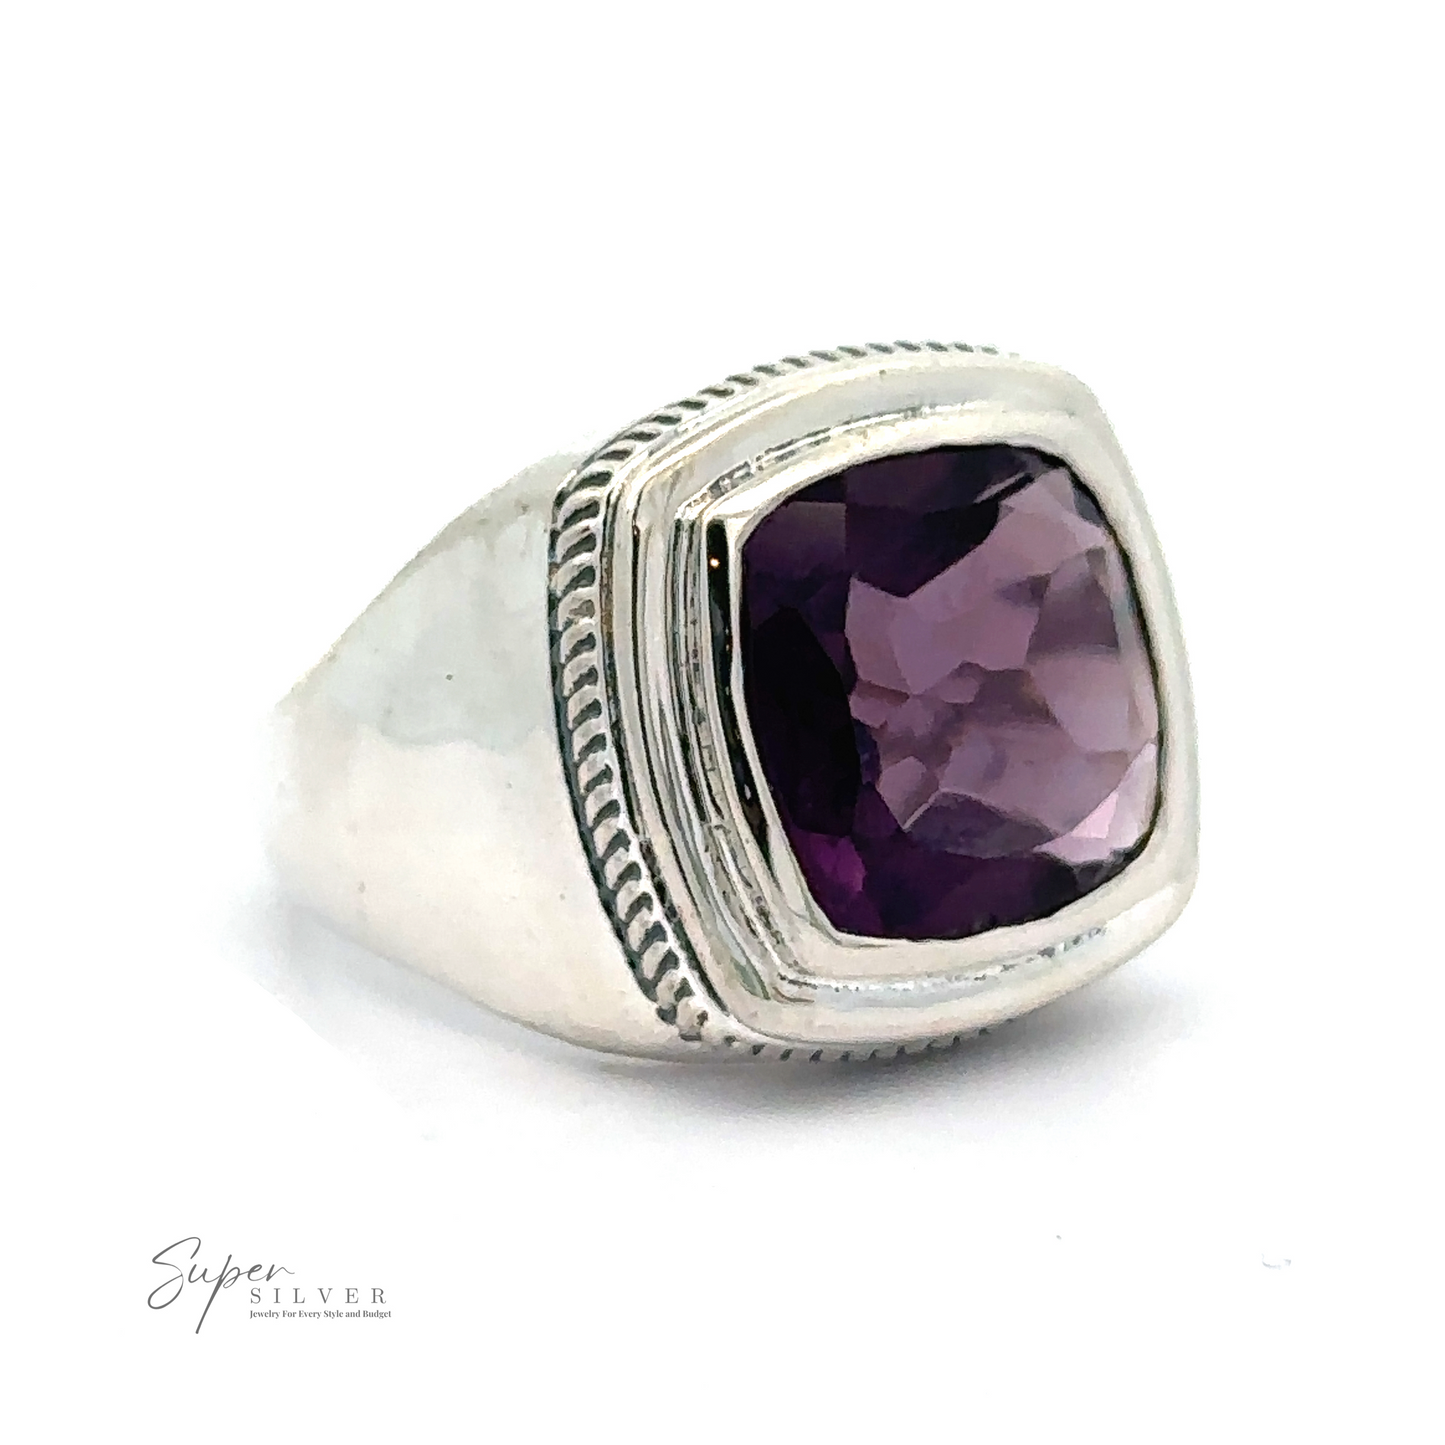 Sterling silver Faceted Stone Signet Ring featuring a square cut Amethyst gemstone set in a bezel setting with decorative grooves around the edge. Logos in black text appear at the bottom left.